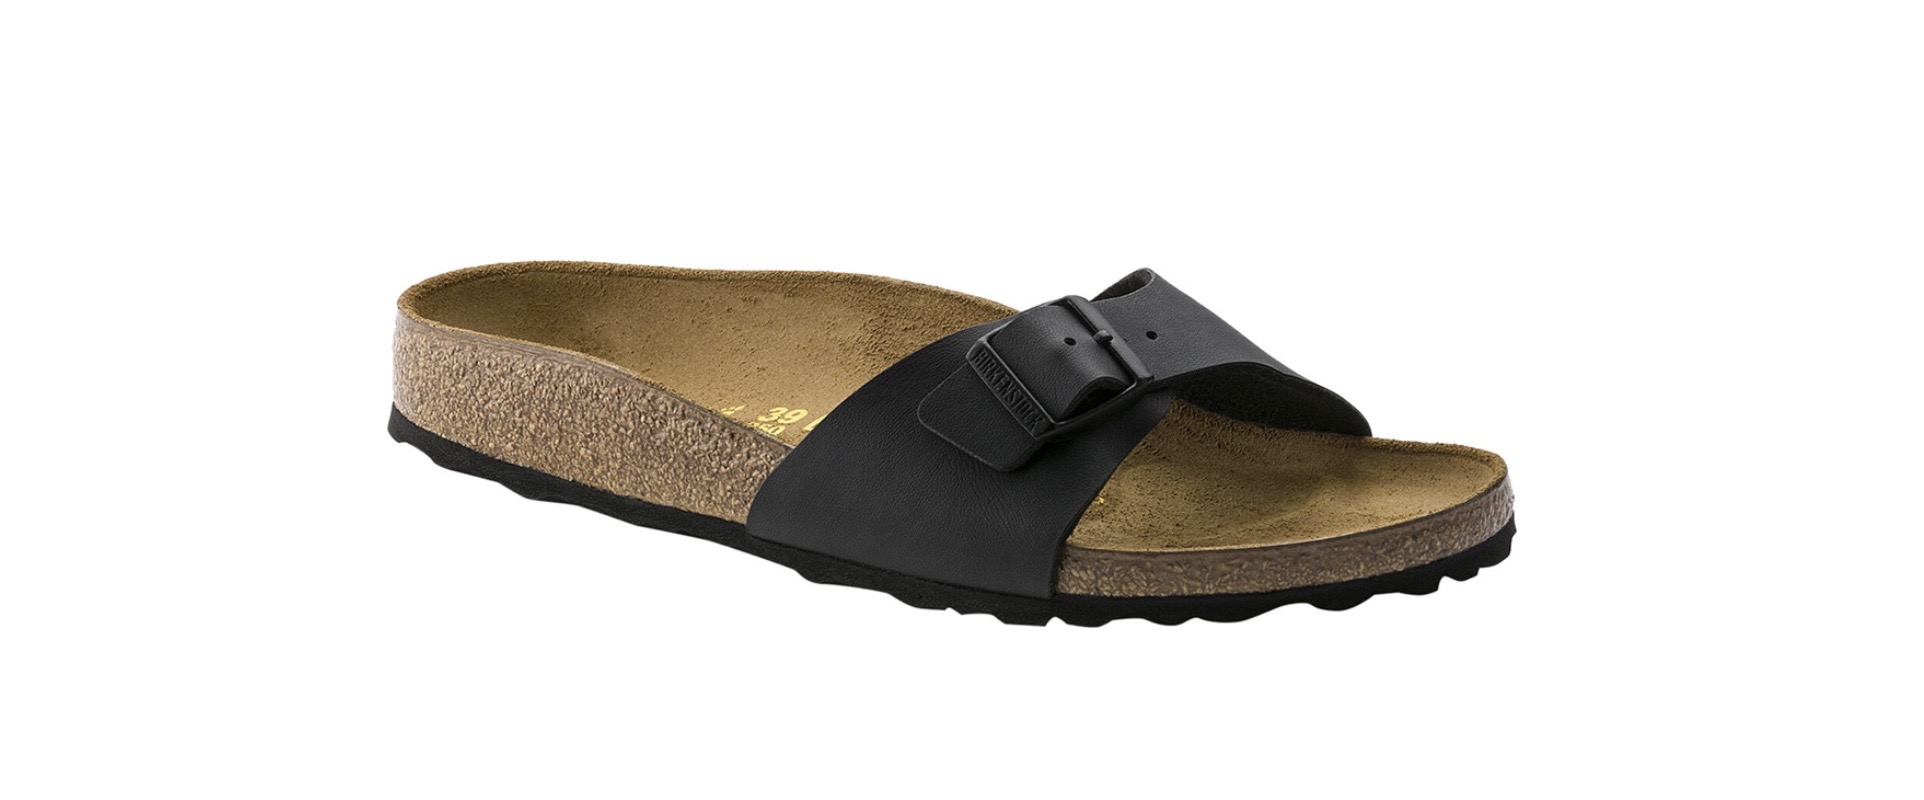 16 Ways to Get Cheap Birkenstocks on Sale - The Coupon Lady